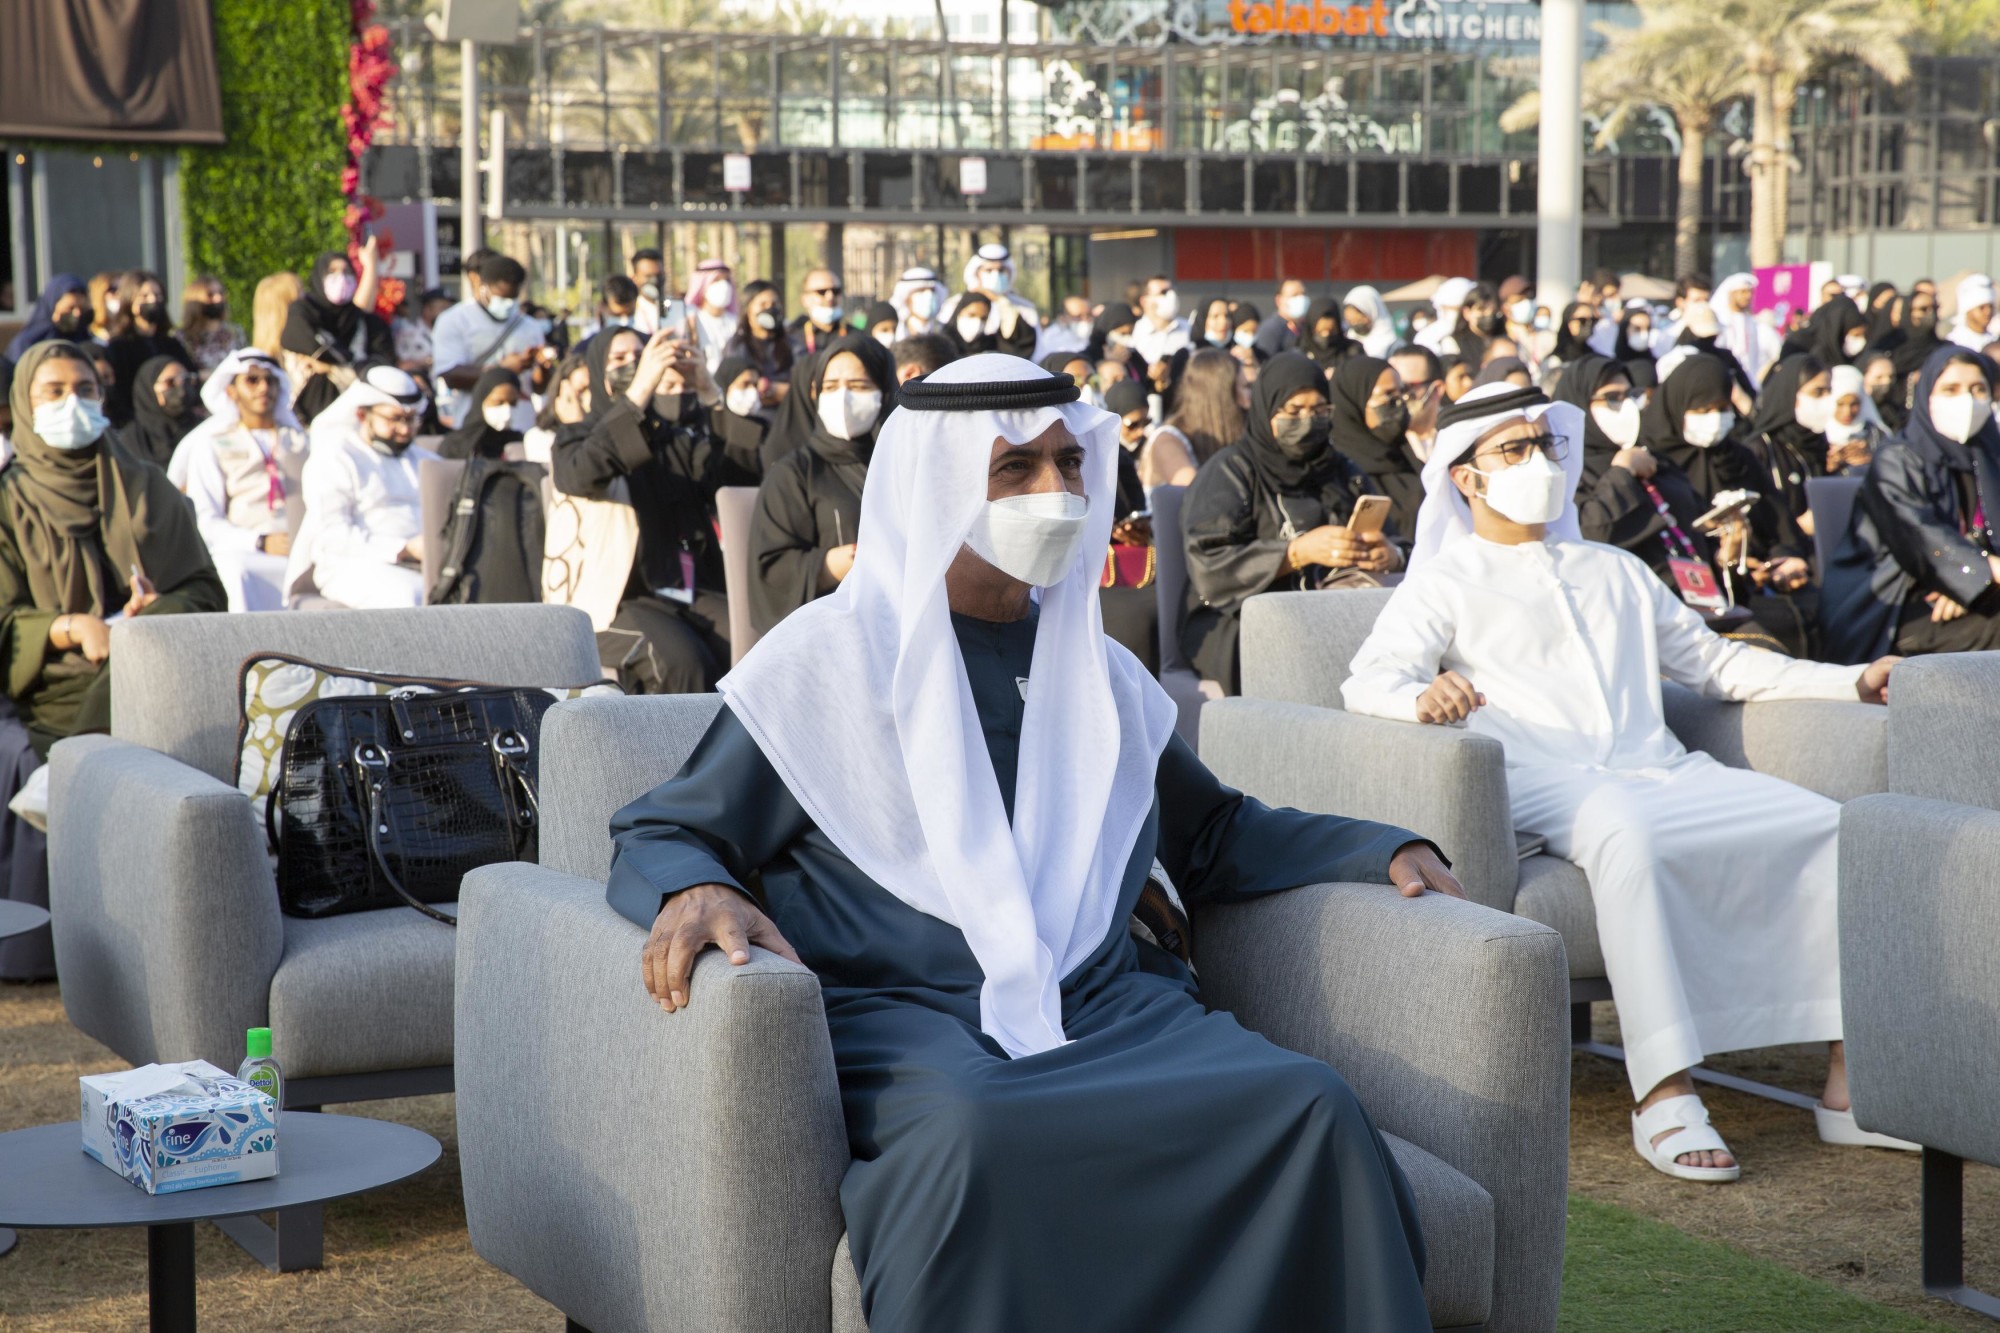 His Excellency Sheikh Nahayan Mabarak Al Nahayan, UAE Minister of Tolerance and Coexistence Commissioner General of Expo 2020 Dubai during International Volunteers Day - Flagship Public event at Jubilee Stage m17413